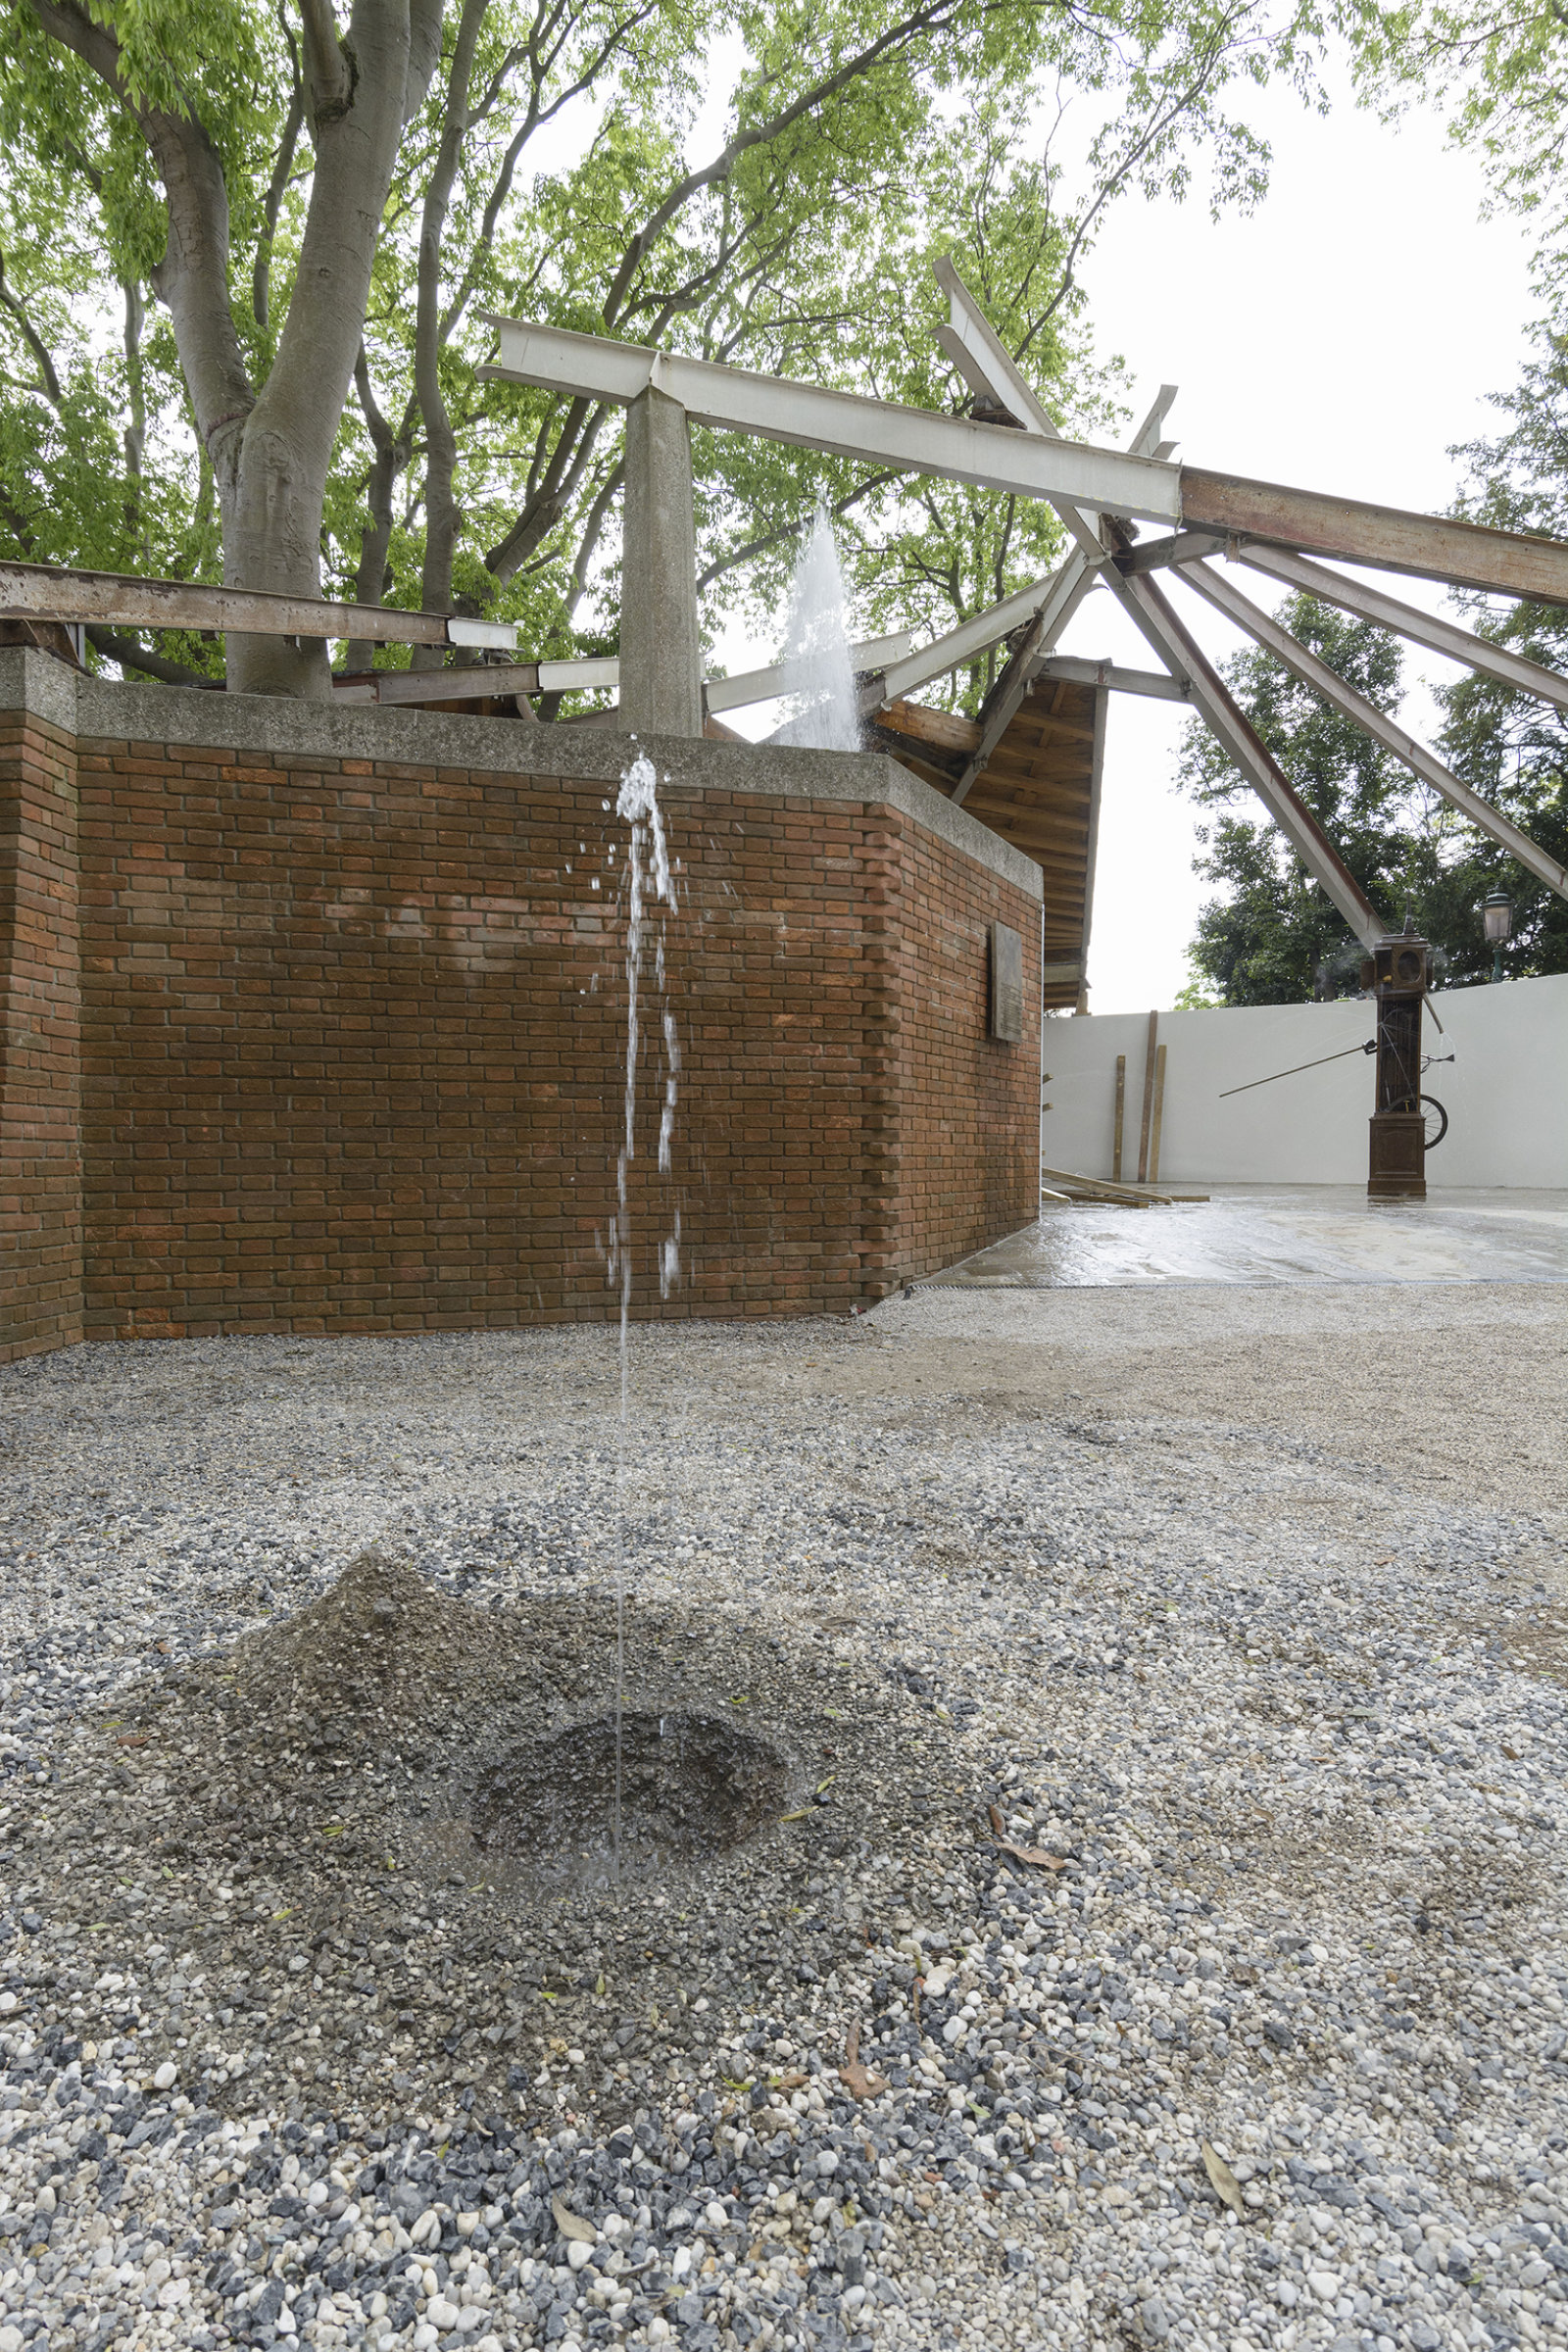 Geoffrey Farmer, Drinking Fountain, 2017, tombak cast of a hole in the ground, sensor, water technics, 12 x 63 x 55 in. (30 x 160 x 140 cm). Installation view, A way out of the mirror, Canada Pavilion, 57th Venice Biennale, Venice, Italy